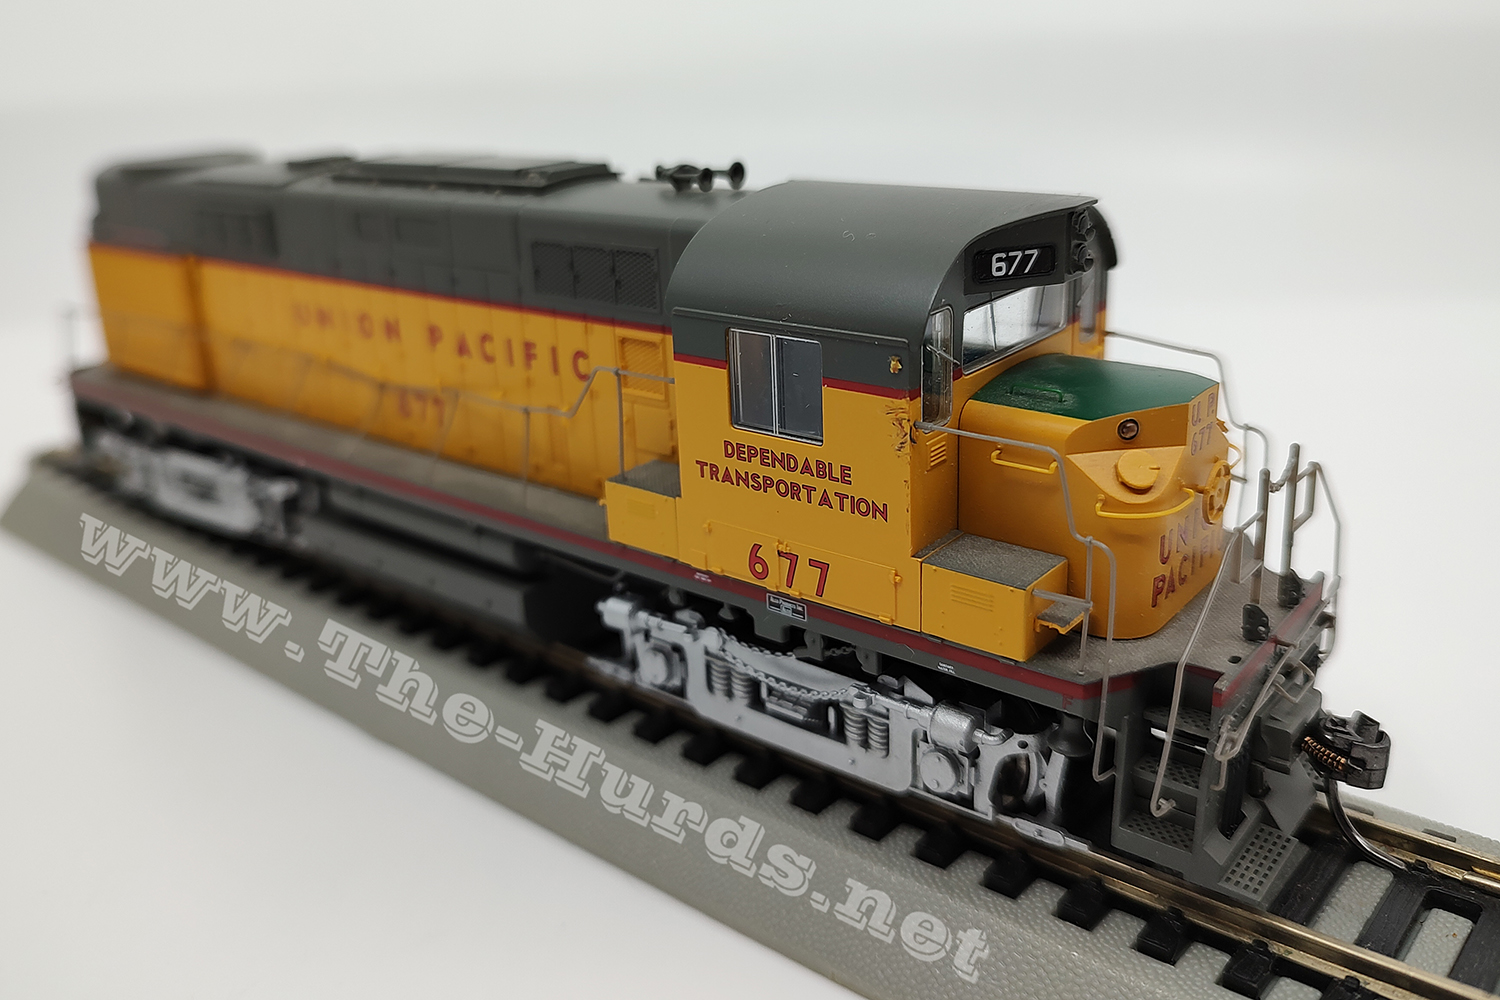 4th view of the Life-Like DCC with Sound Union Pacific #677 Alco RS27 in my HO-scale Collection in my HO-scale Collection